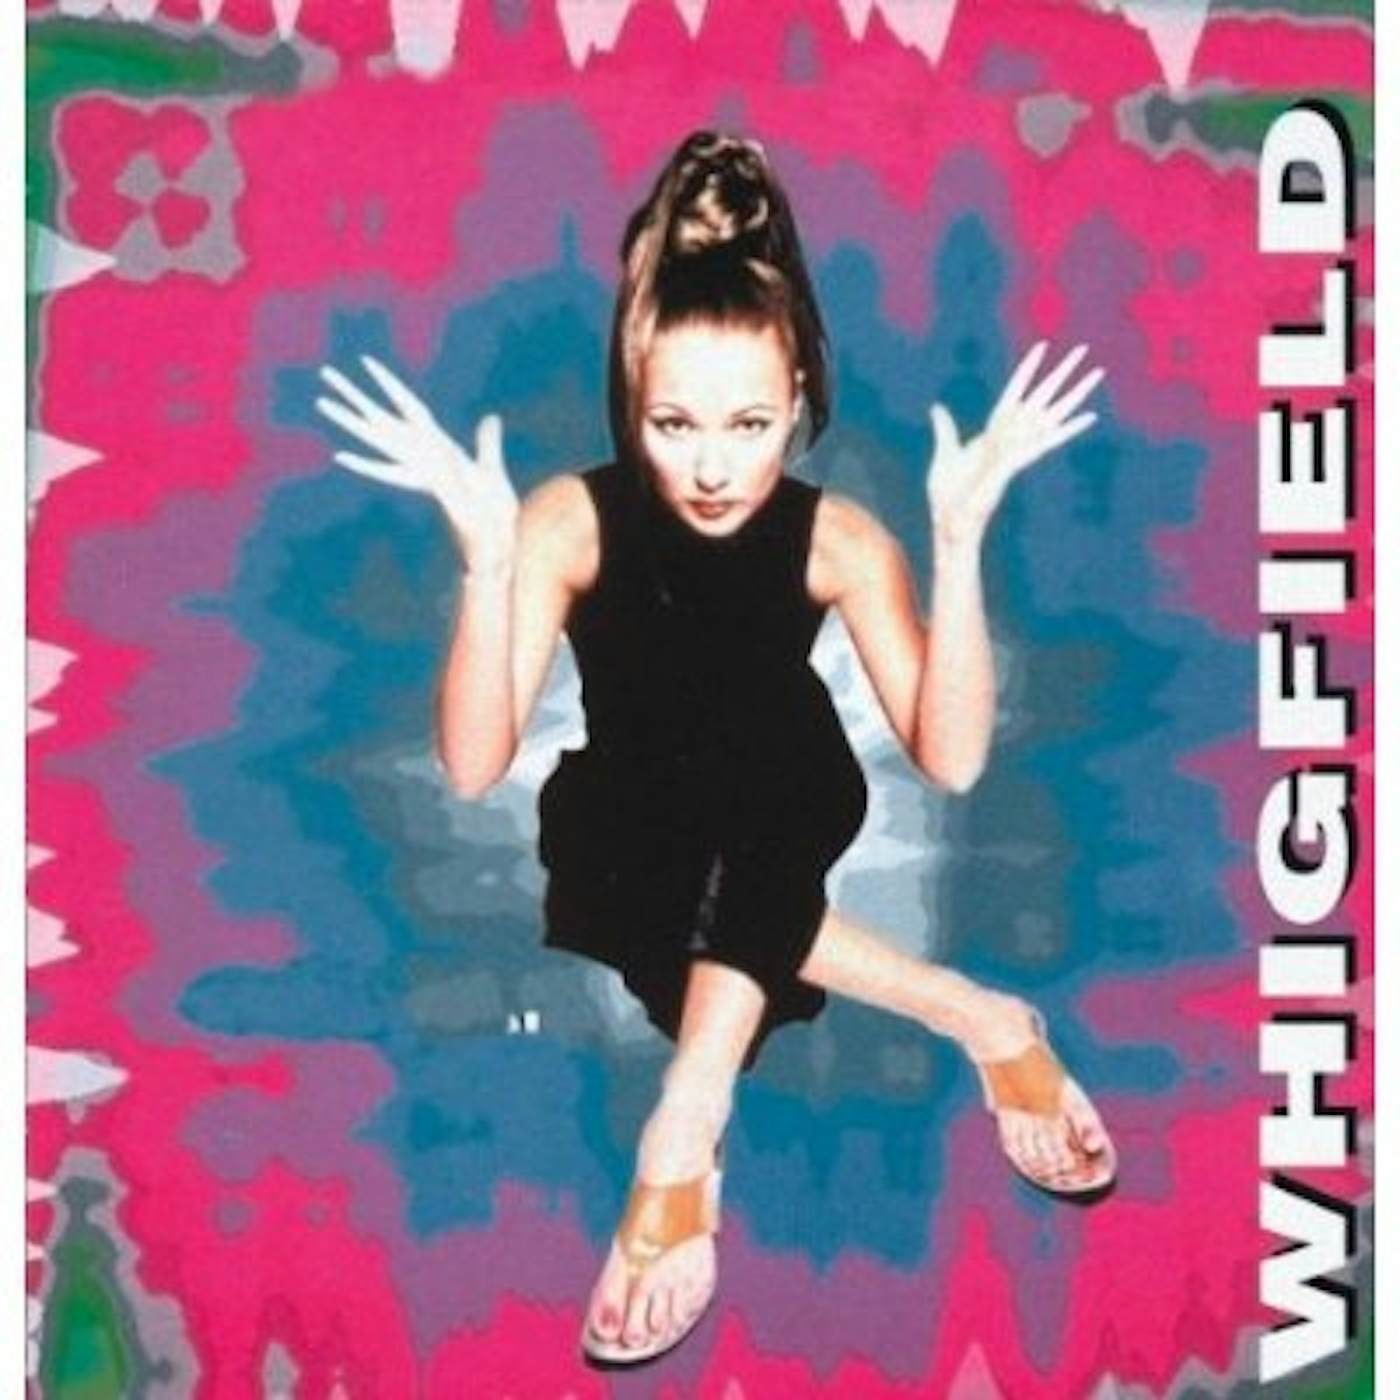 WHIGFIELD CD